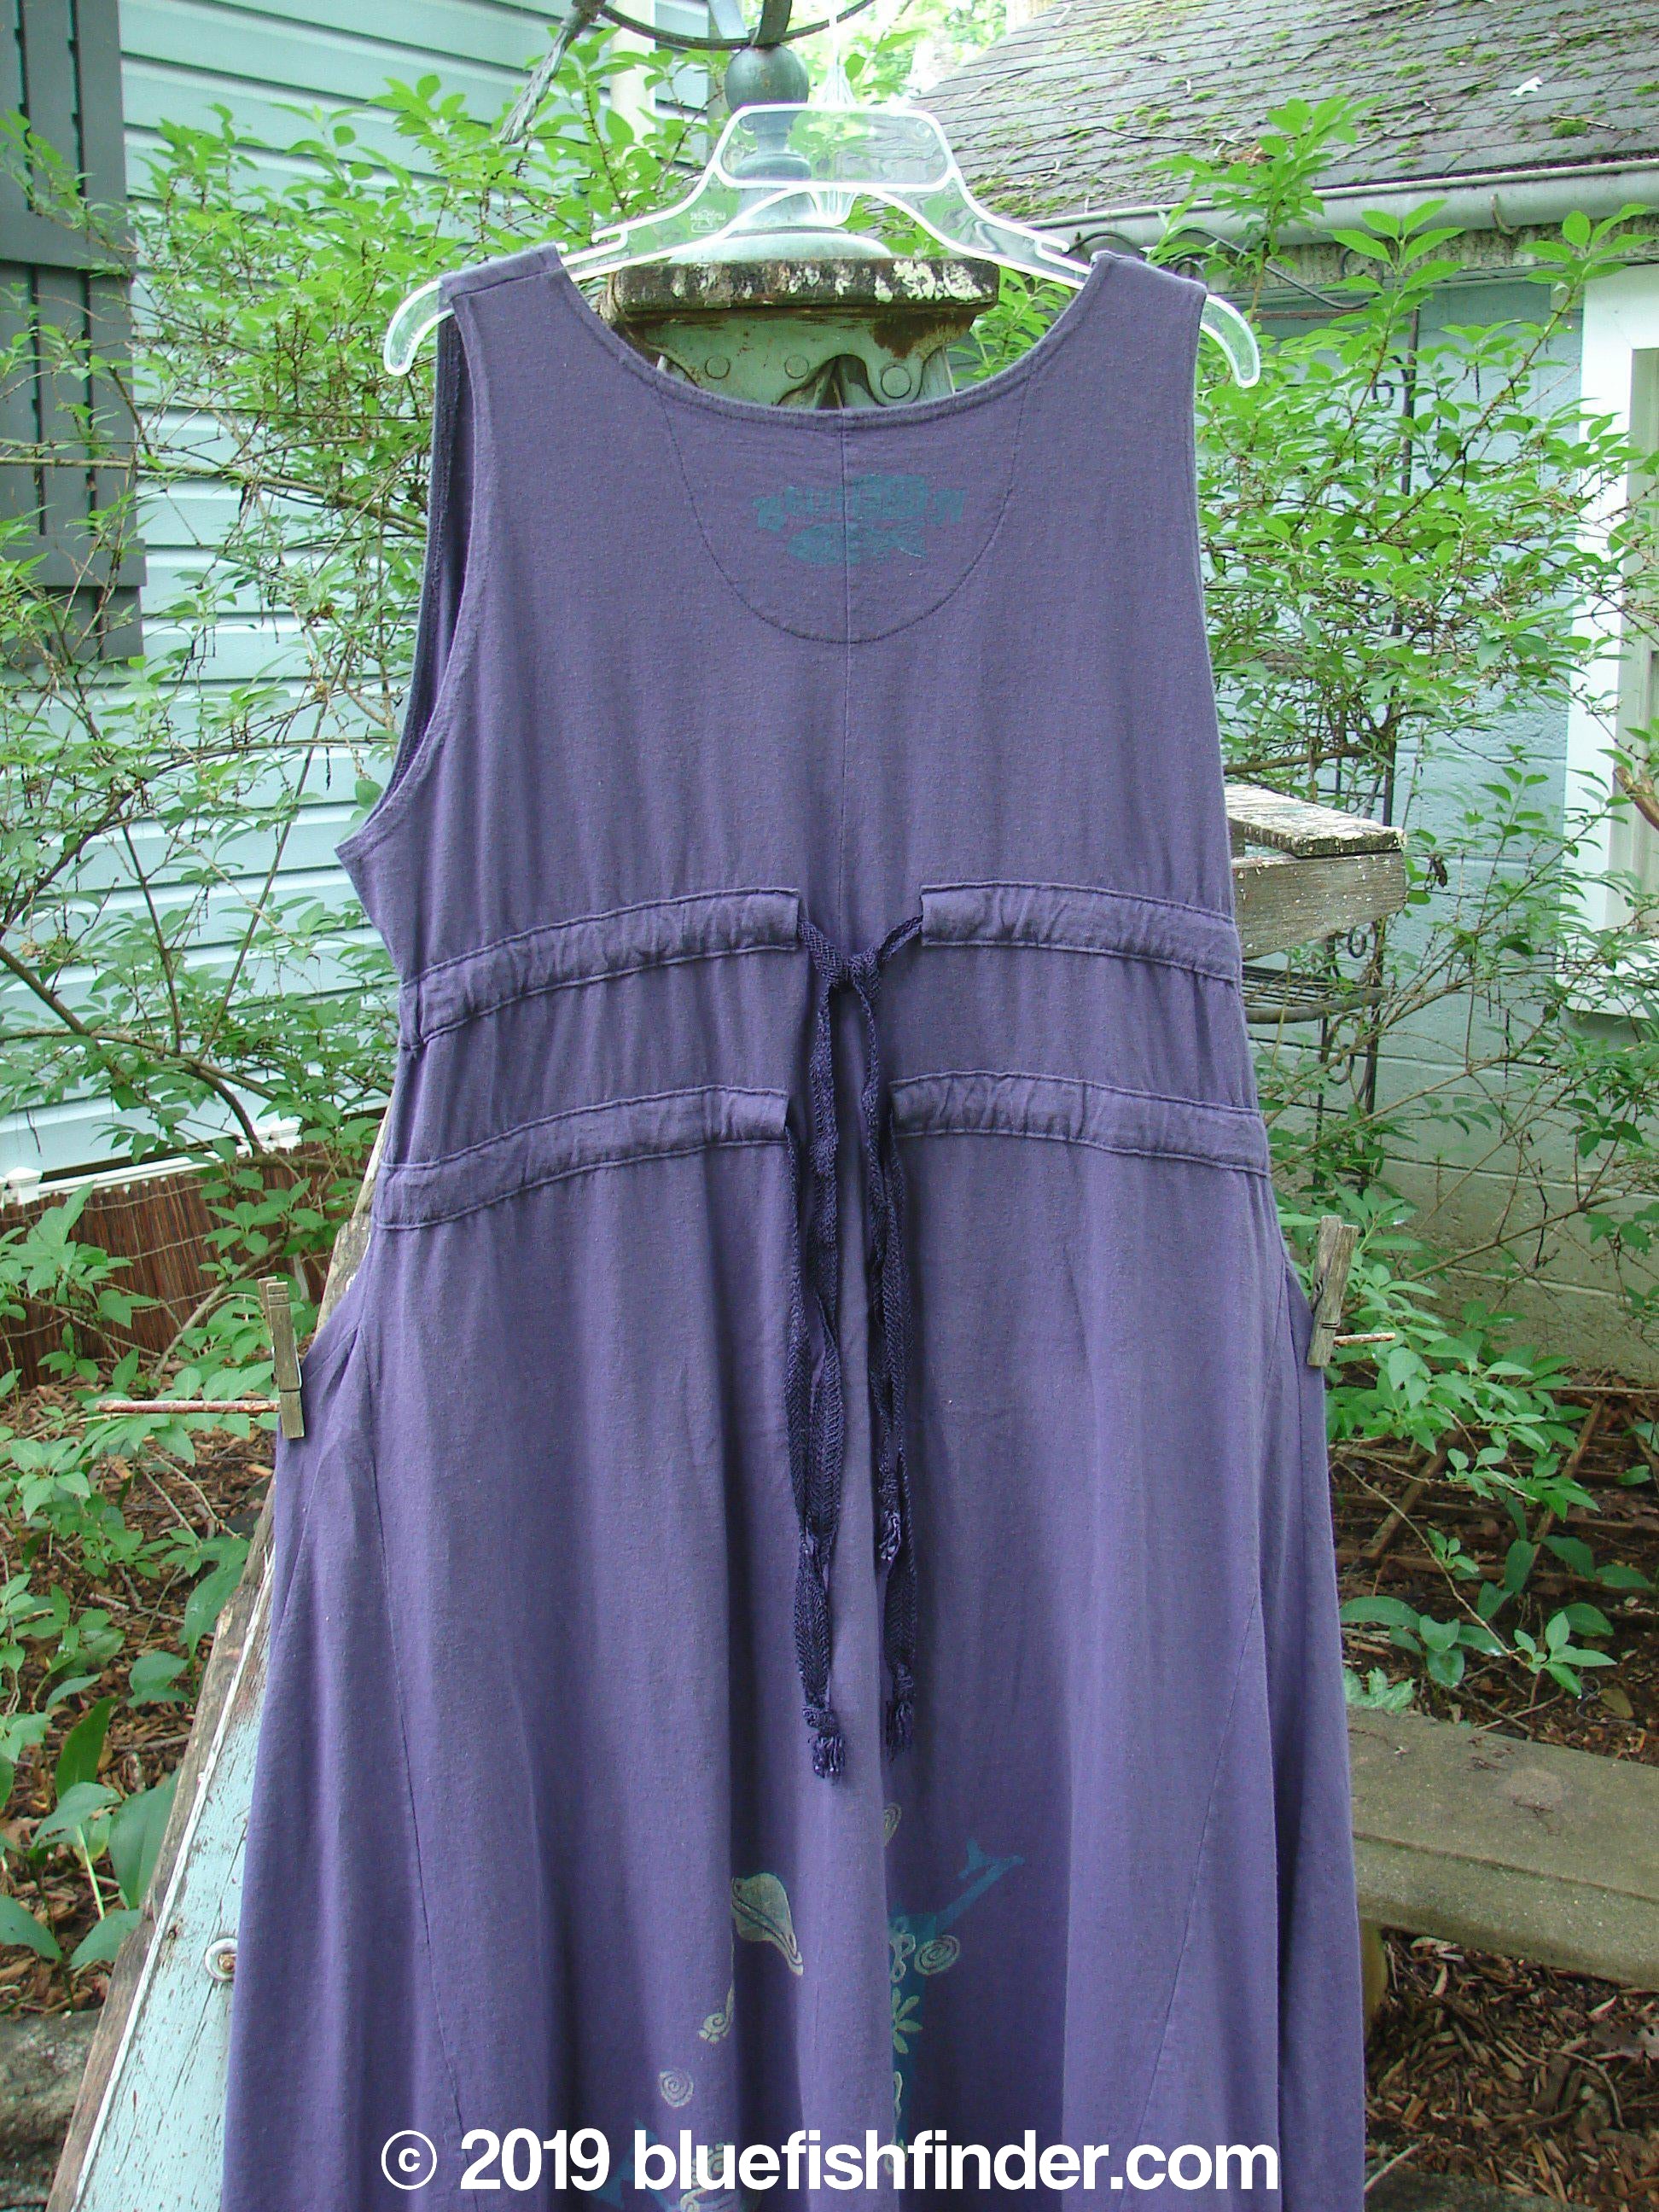 1994 Spin Jumper Mixed Purple Nuit Size 2: A medium weight cotton dress with an empire waist, V-shaped neckline, and sweeping hemline. Features a nature-themed paint design with leaves and vines.